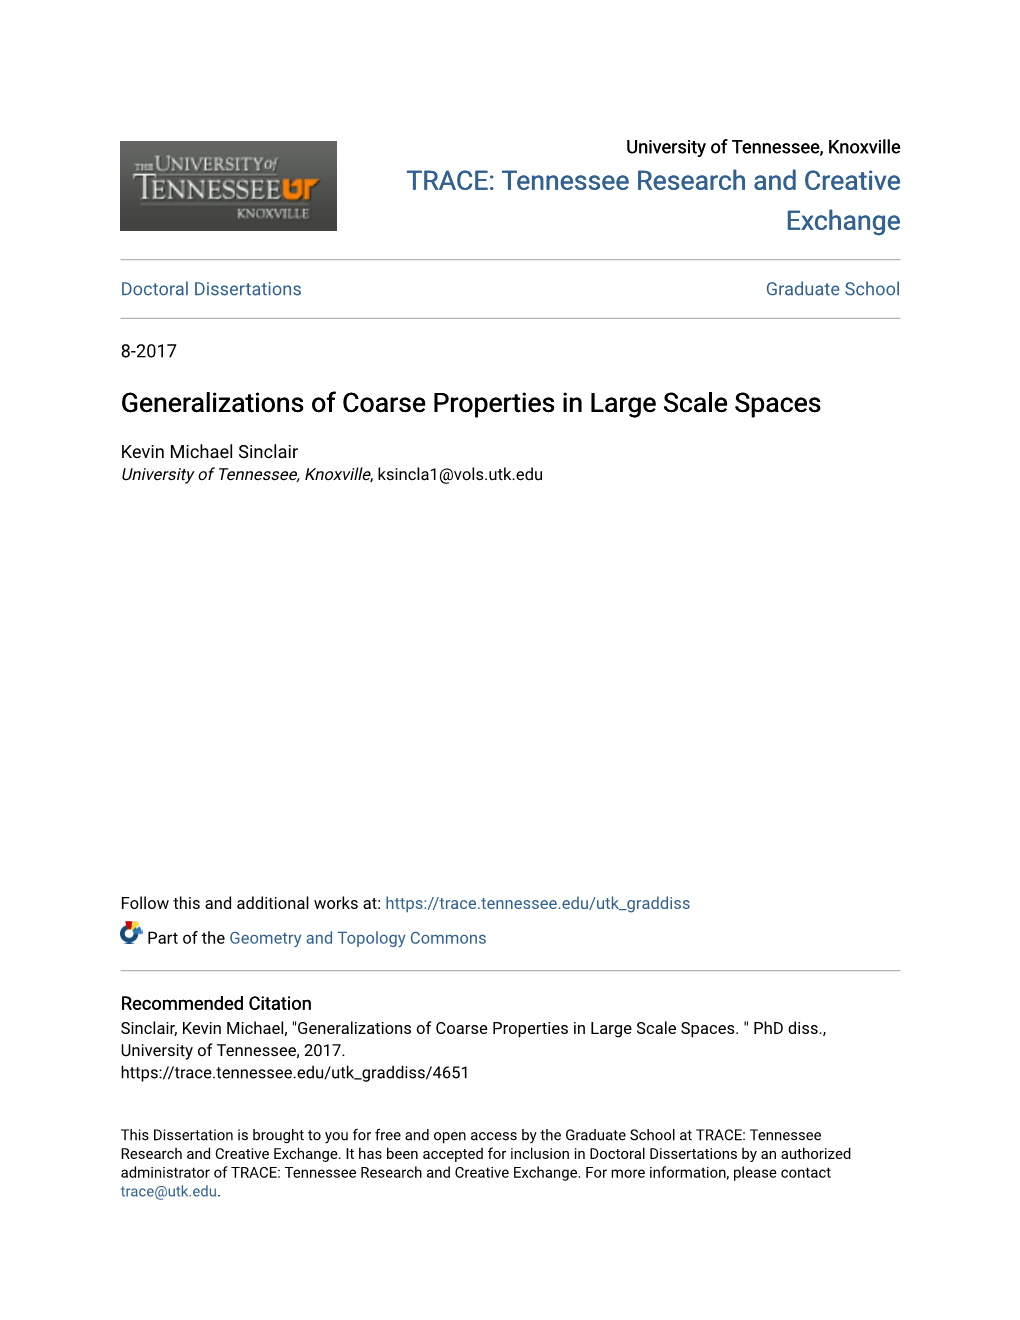 Generalizations of Coarse Properties in Large Scale Spaces